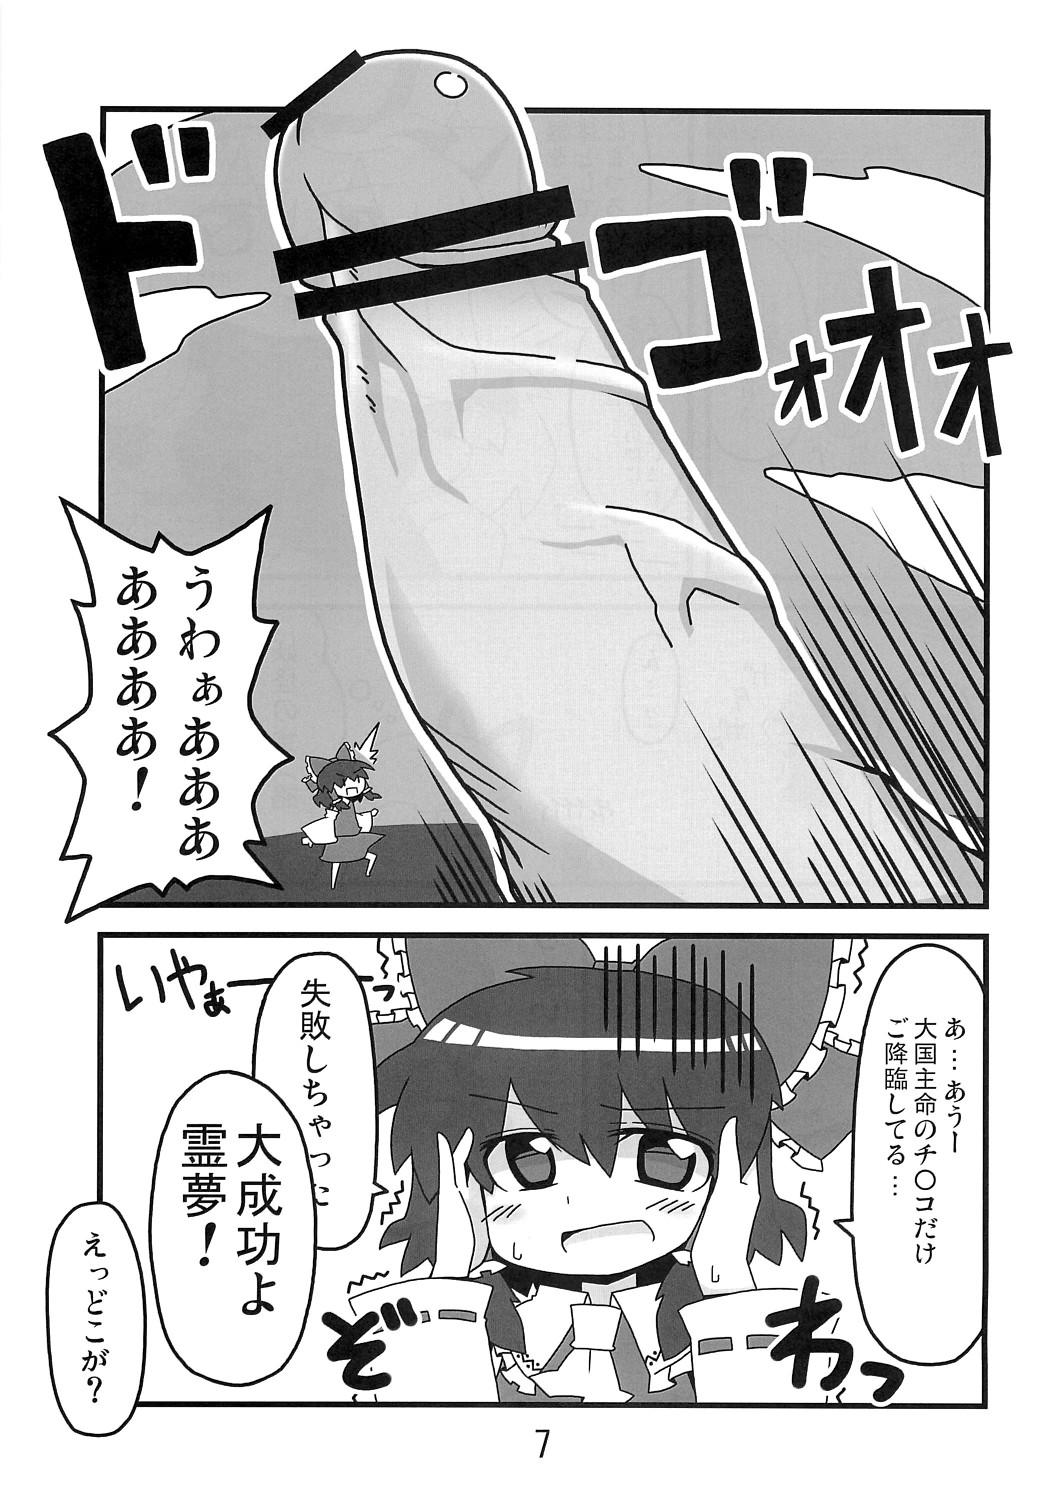 Bhabi 東方豊年祭 - Touhou project Cumfacial - Page 6